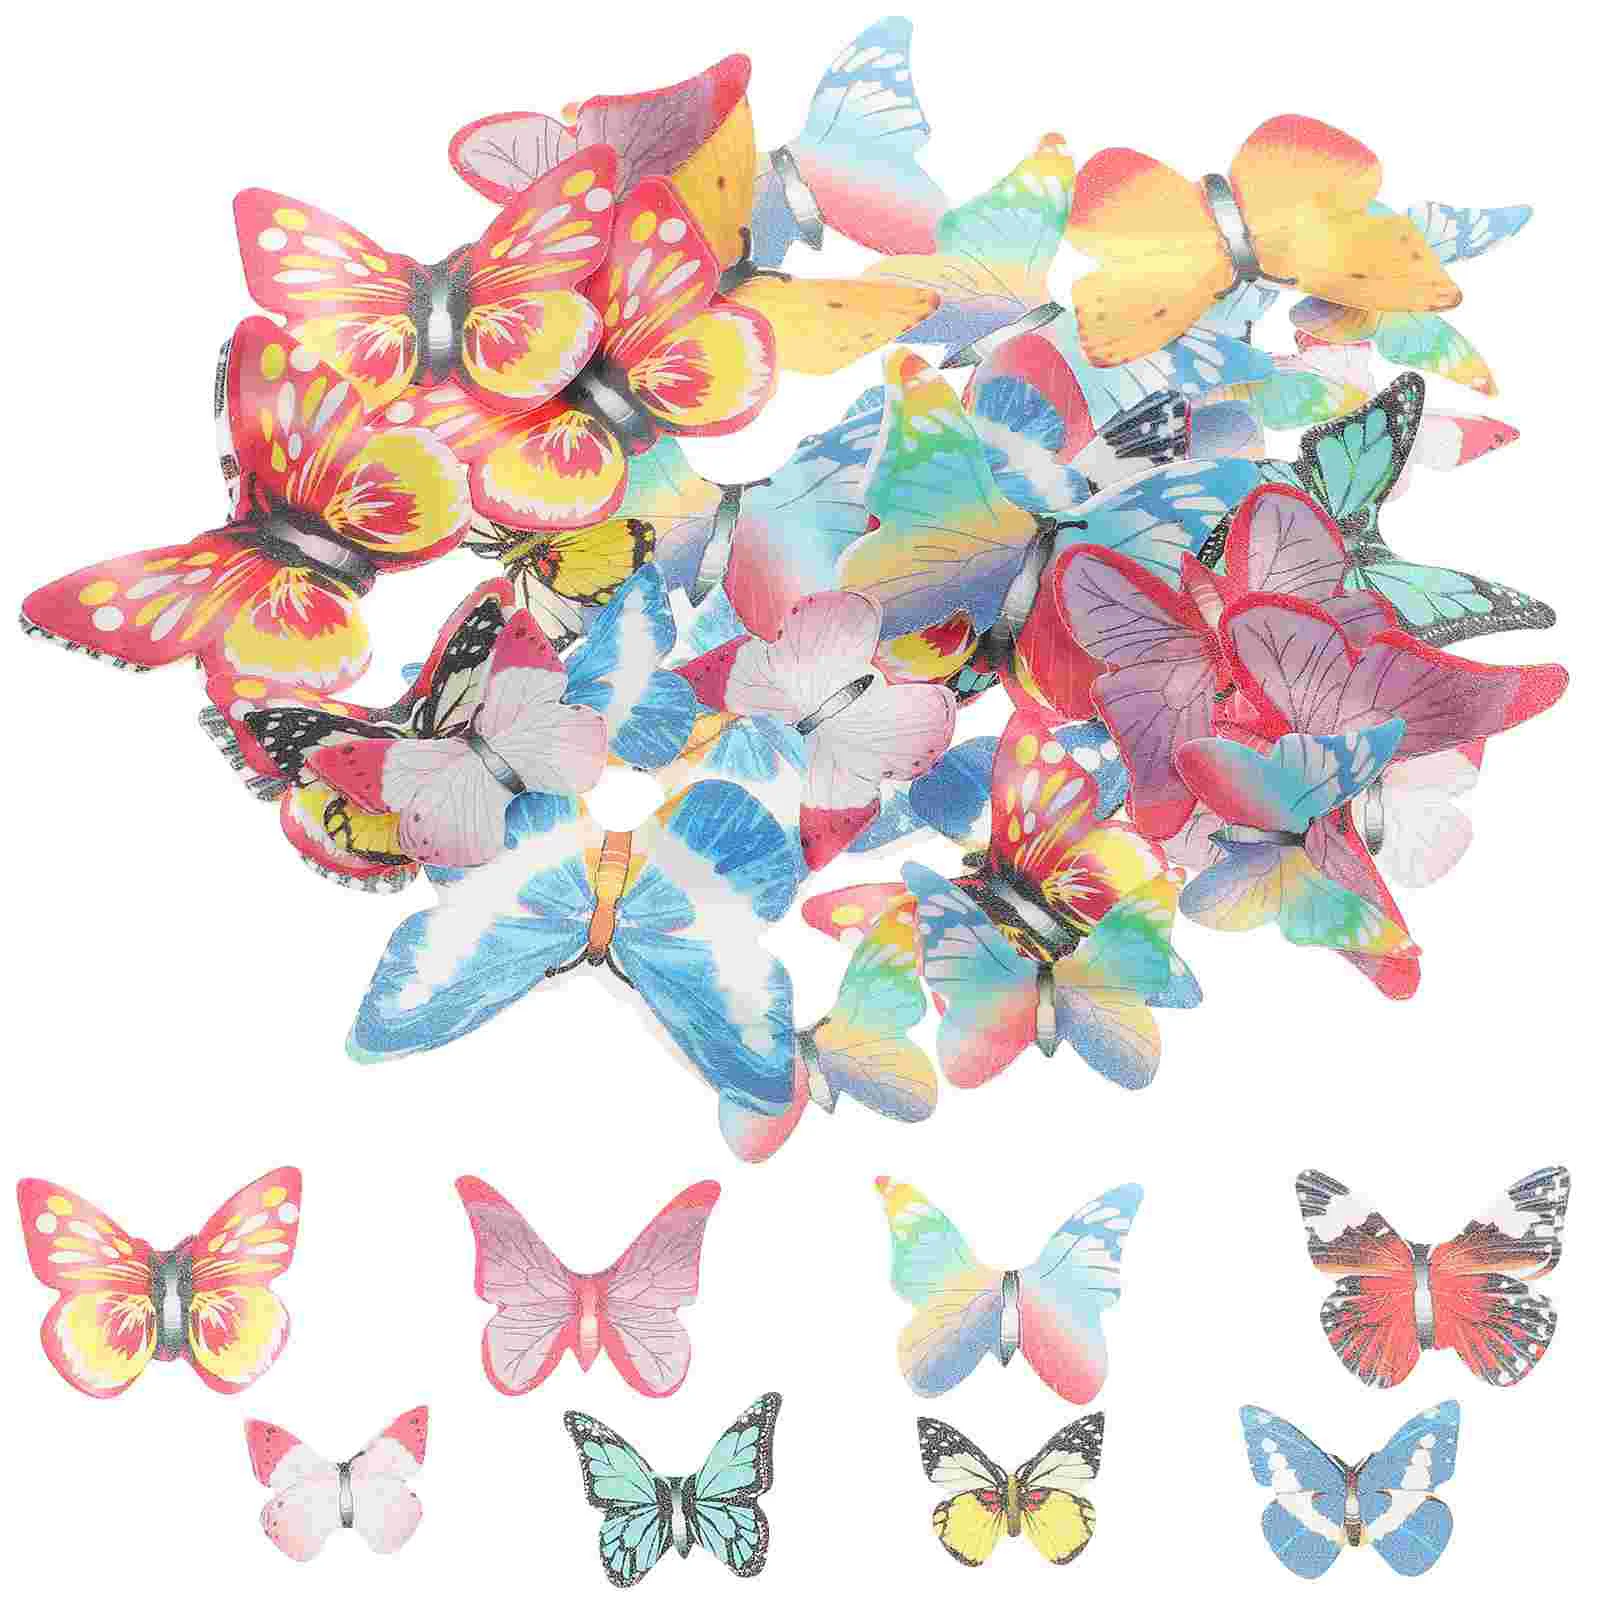 

Cake Edible Cupcake Butterflies Toppers Decorations Paper Decorating Picks Topper Flowers Rice Decoration Wafer Ornament